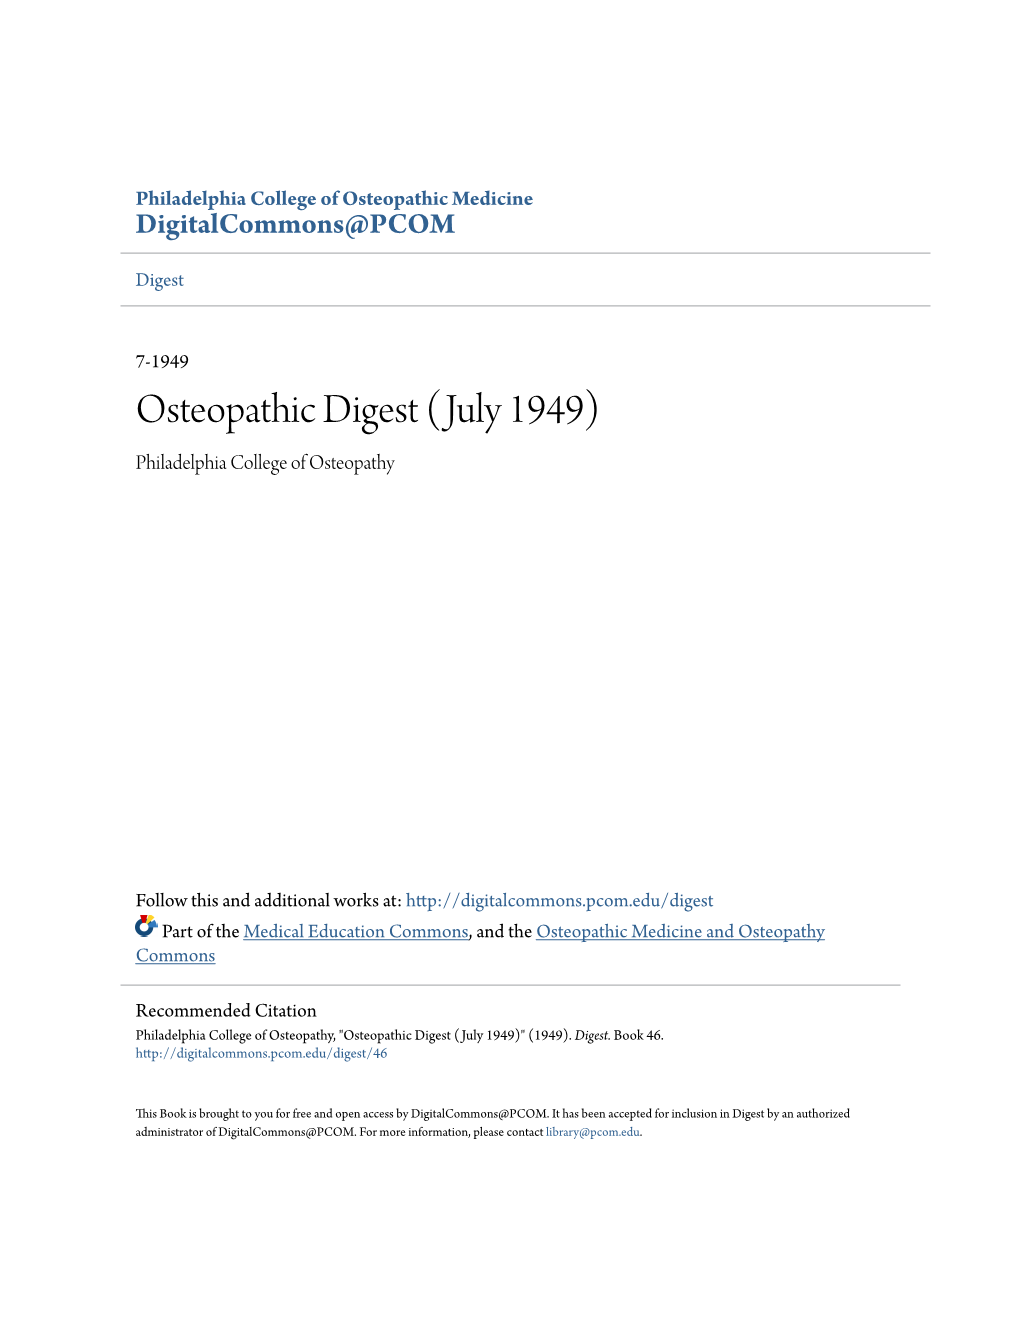 Osteopathic Digest (July 1949) Philadelphia College of Osteopathy